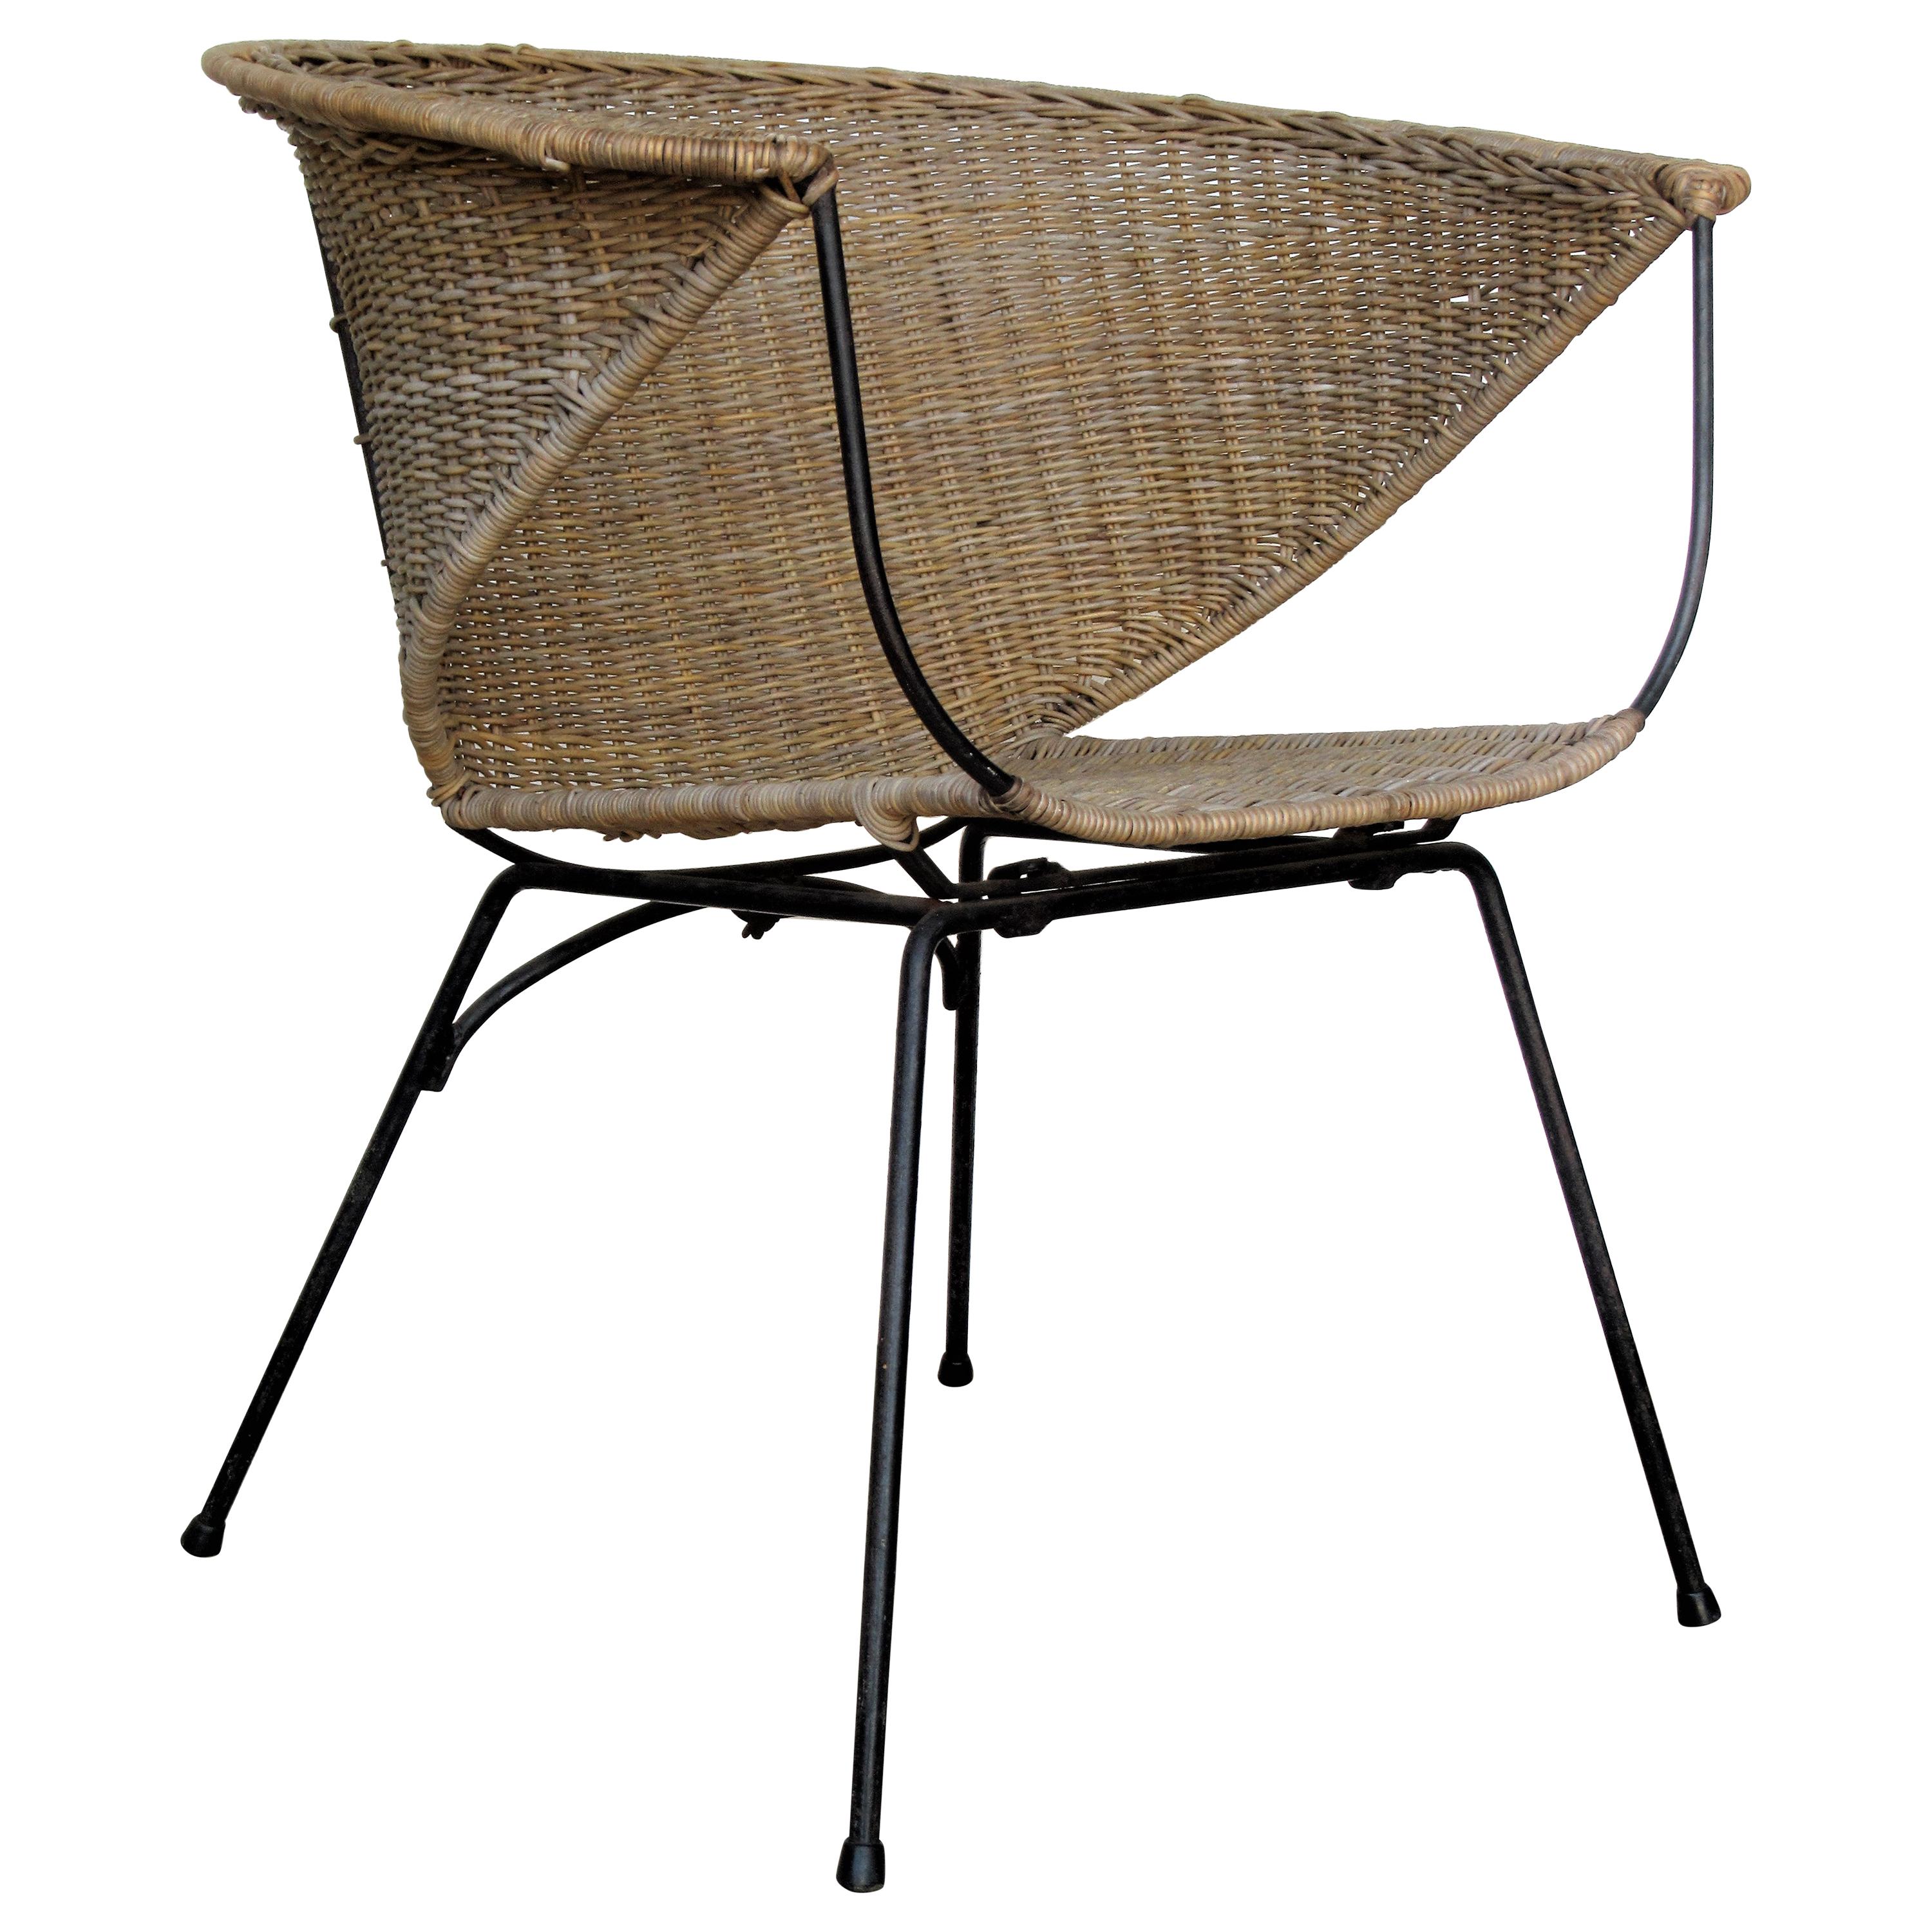  Mid 20th Century Modernist Iron and Rattan Chair